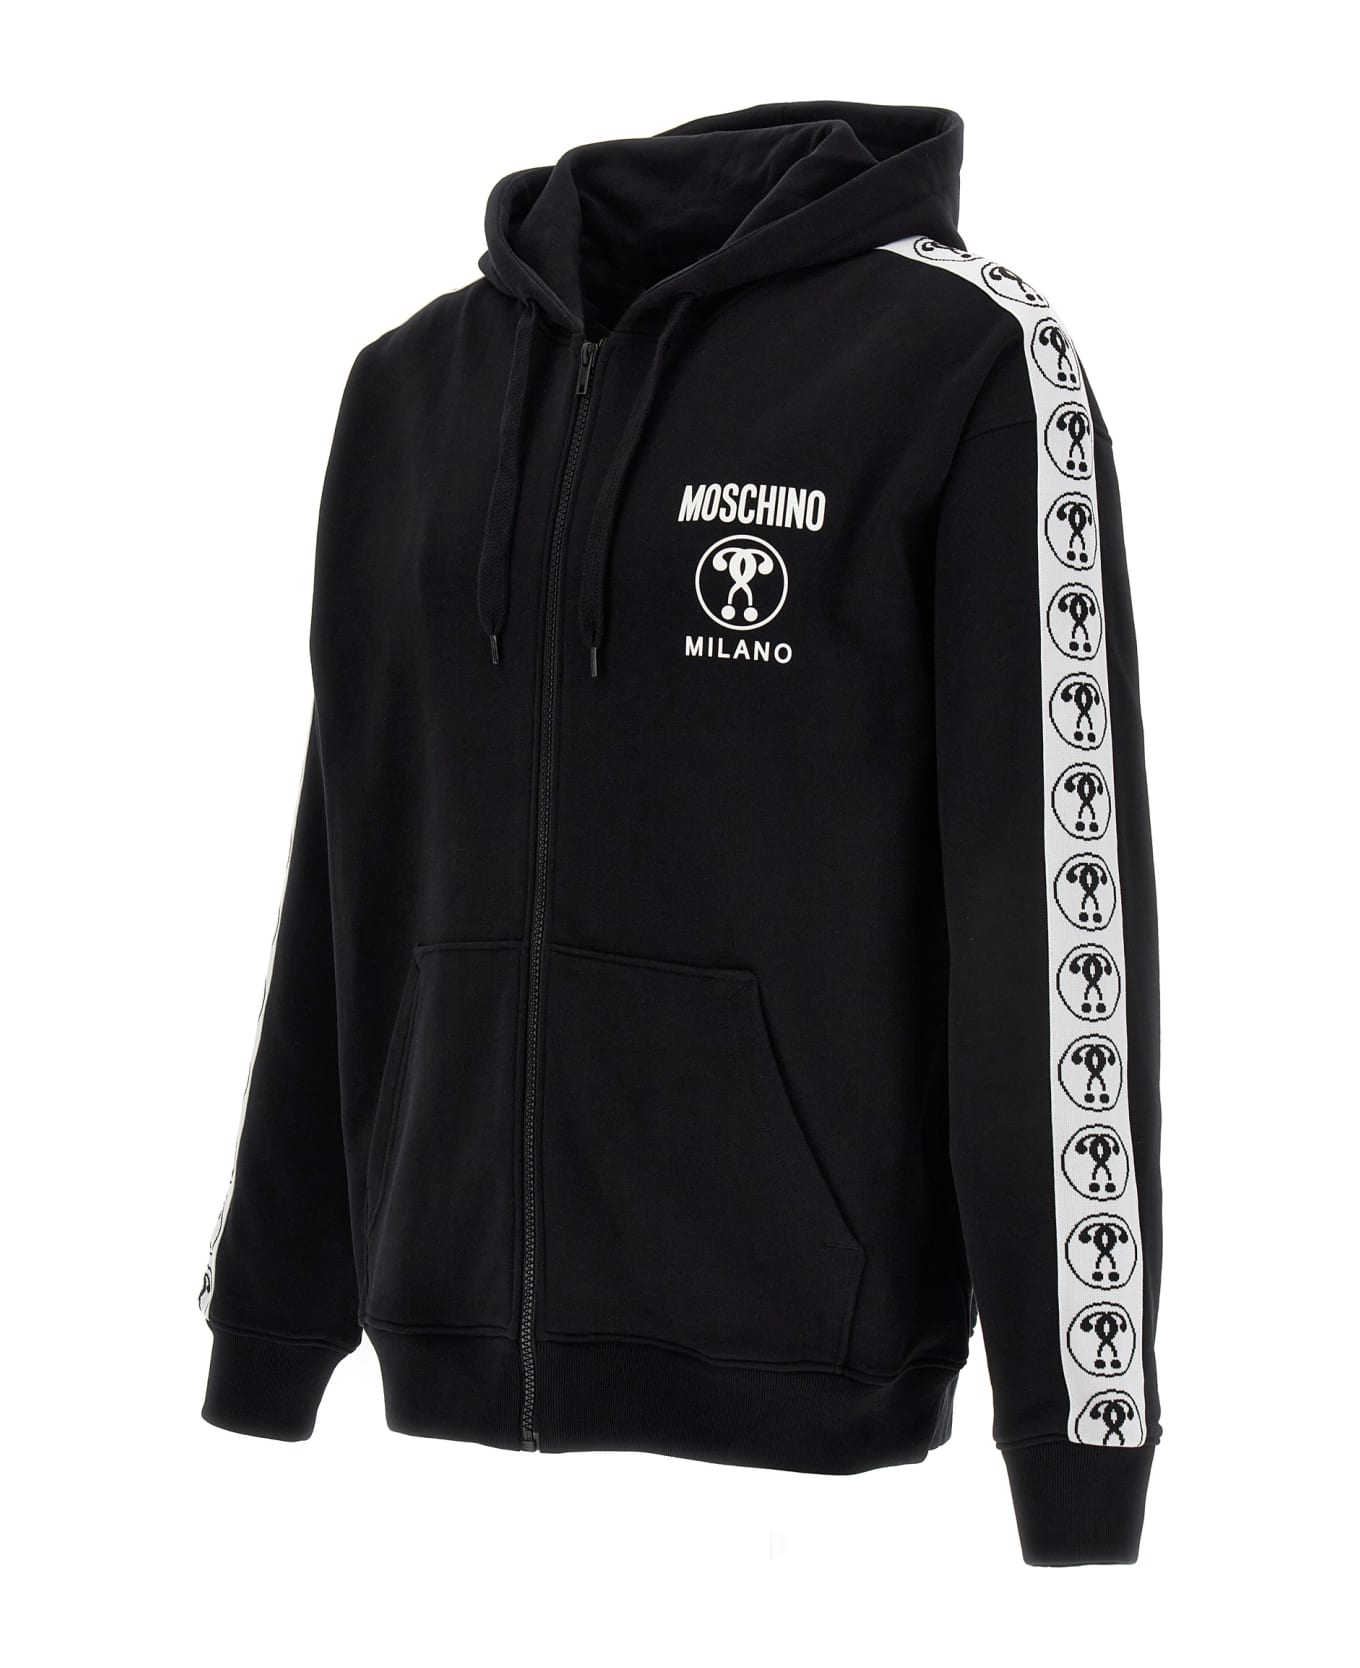 Moschino Double Question Mark Hoodie - White/Black